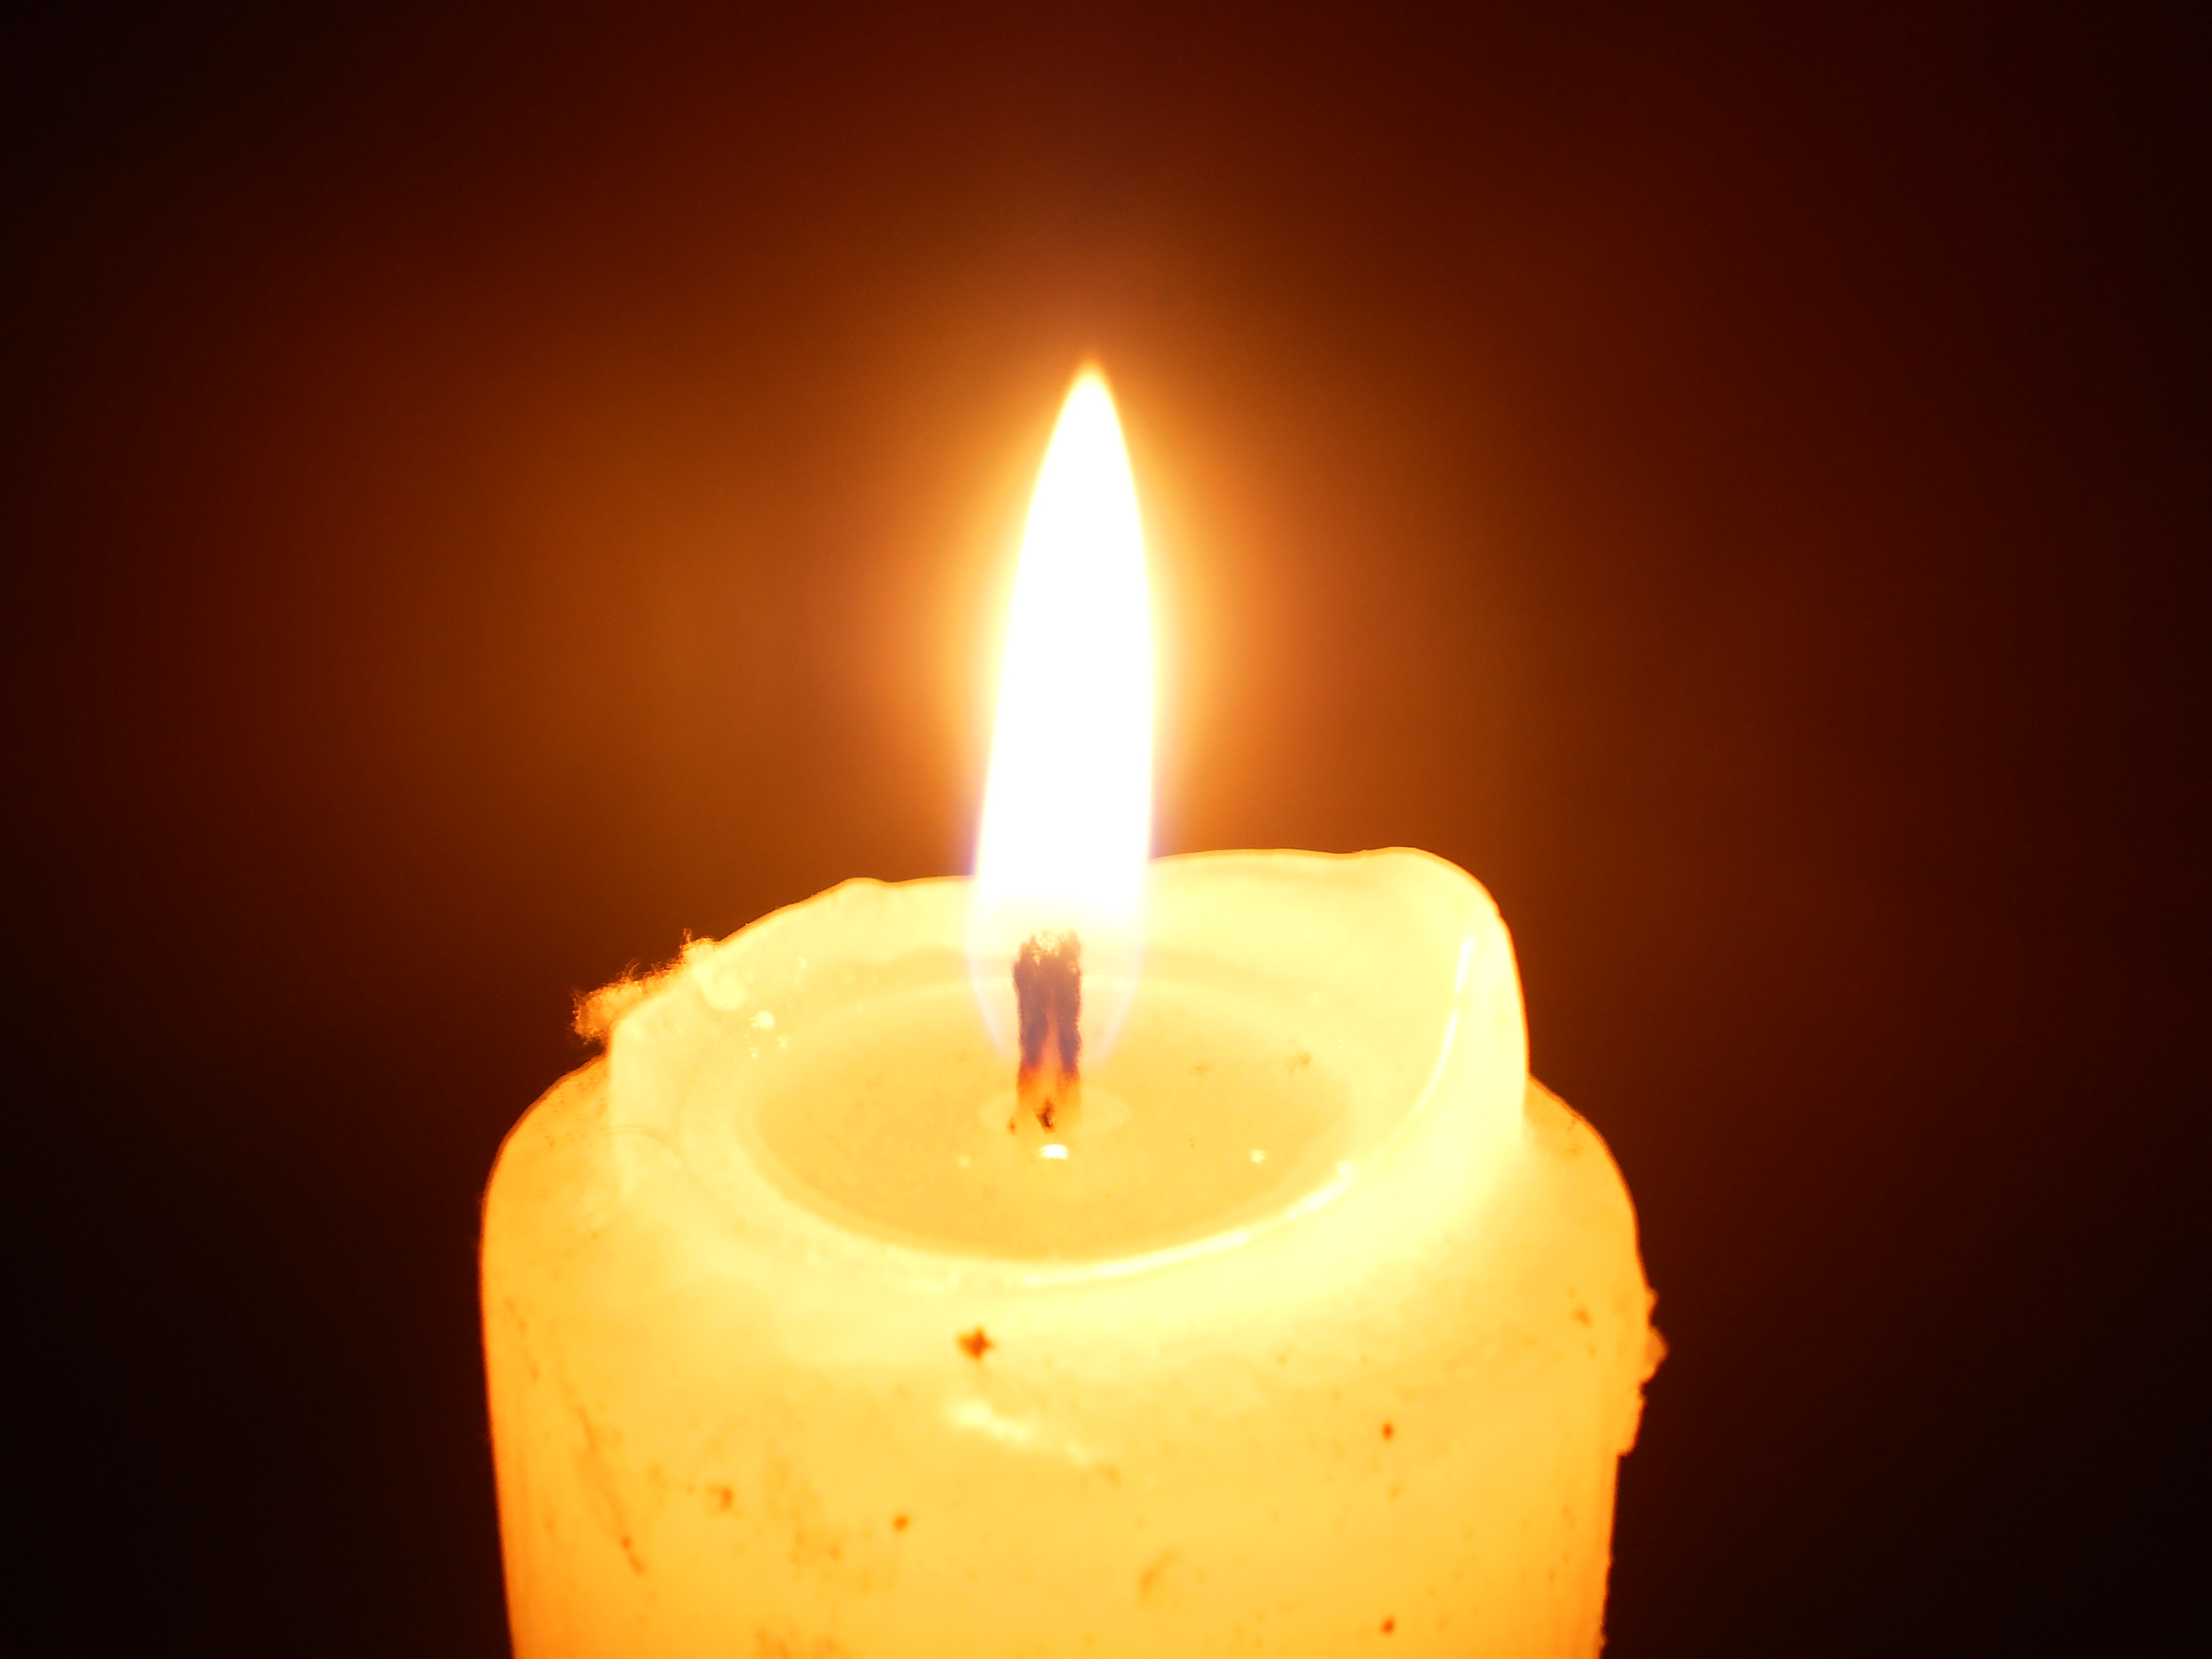 File:Lighted candle at night16.JPG - Wikimedia Commons